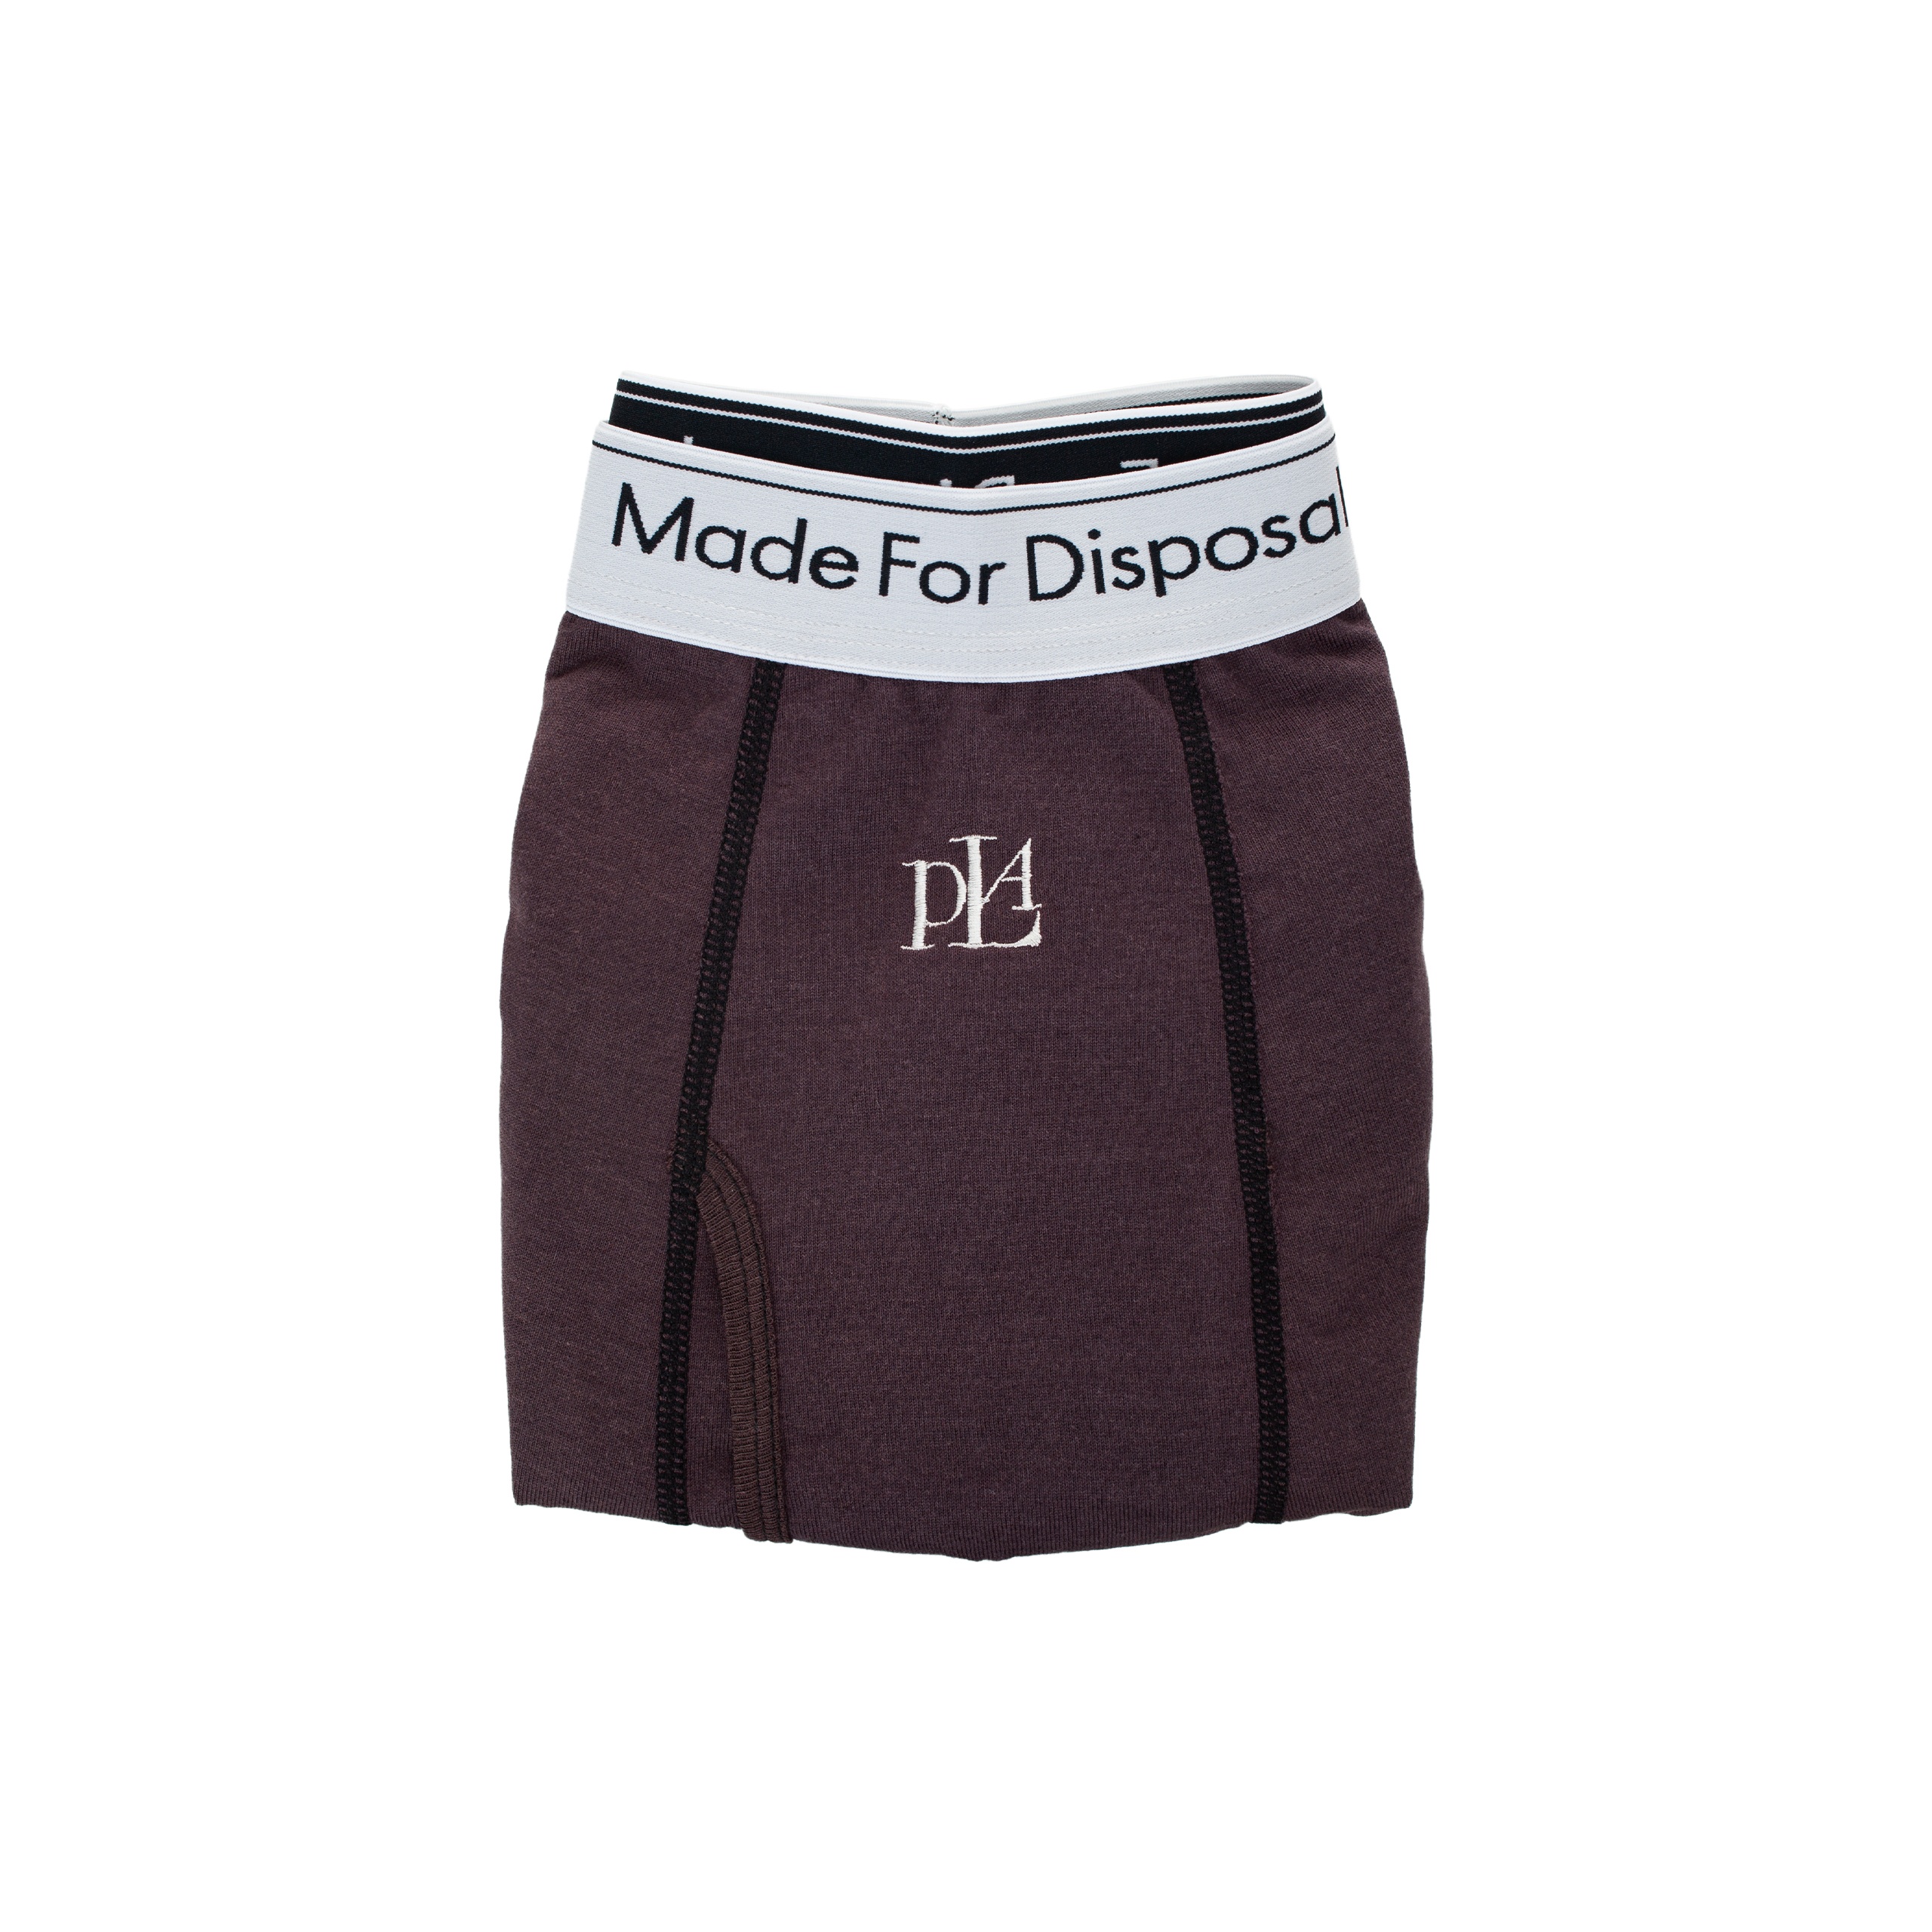 MADE FOR DISPOSAL BRIEFS - 3